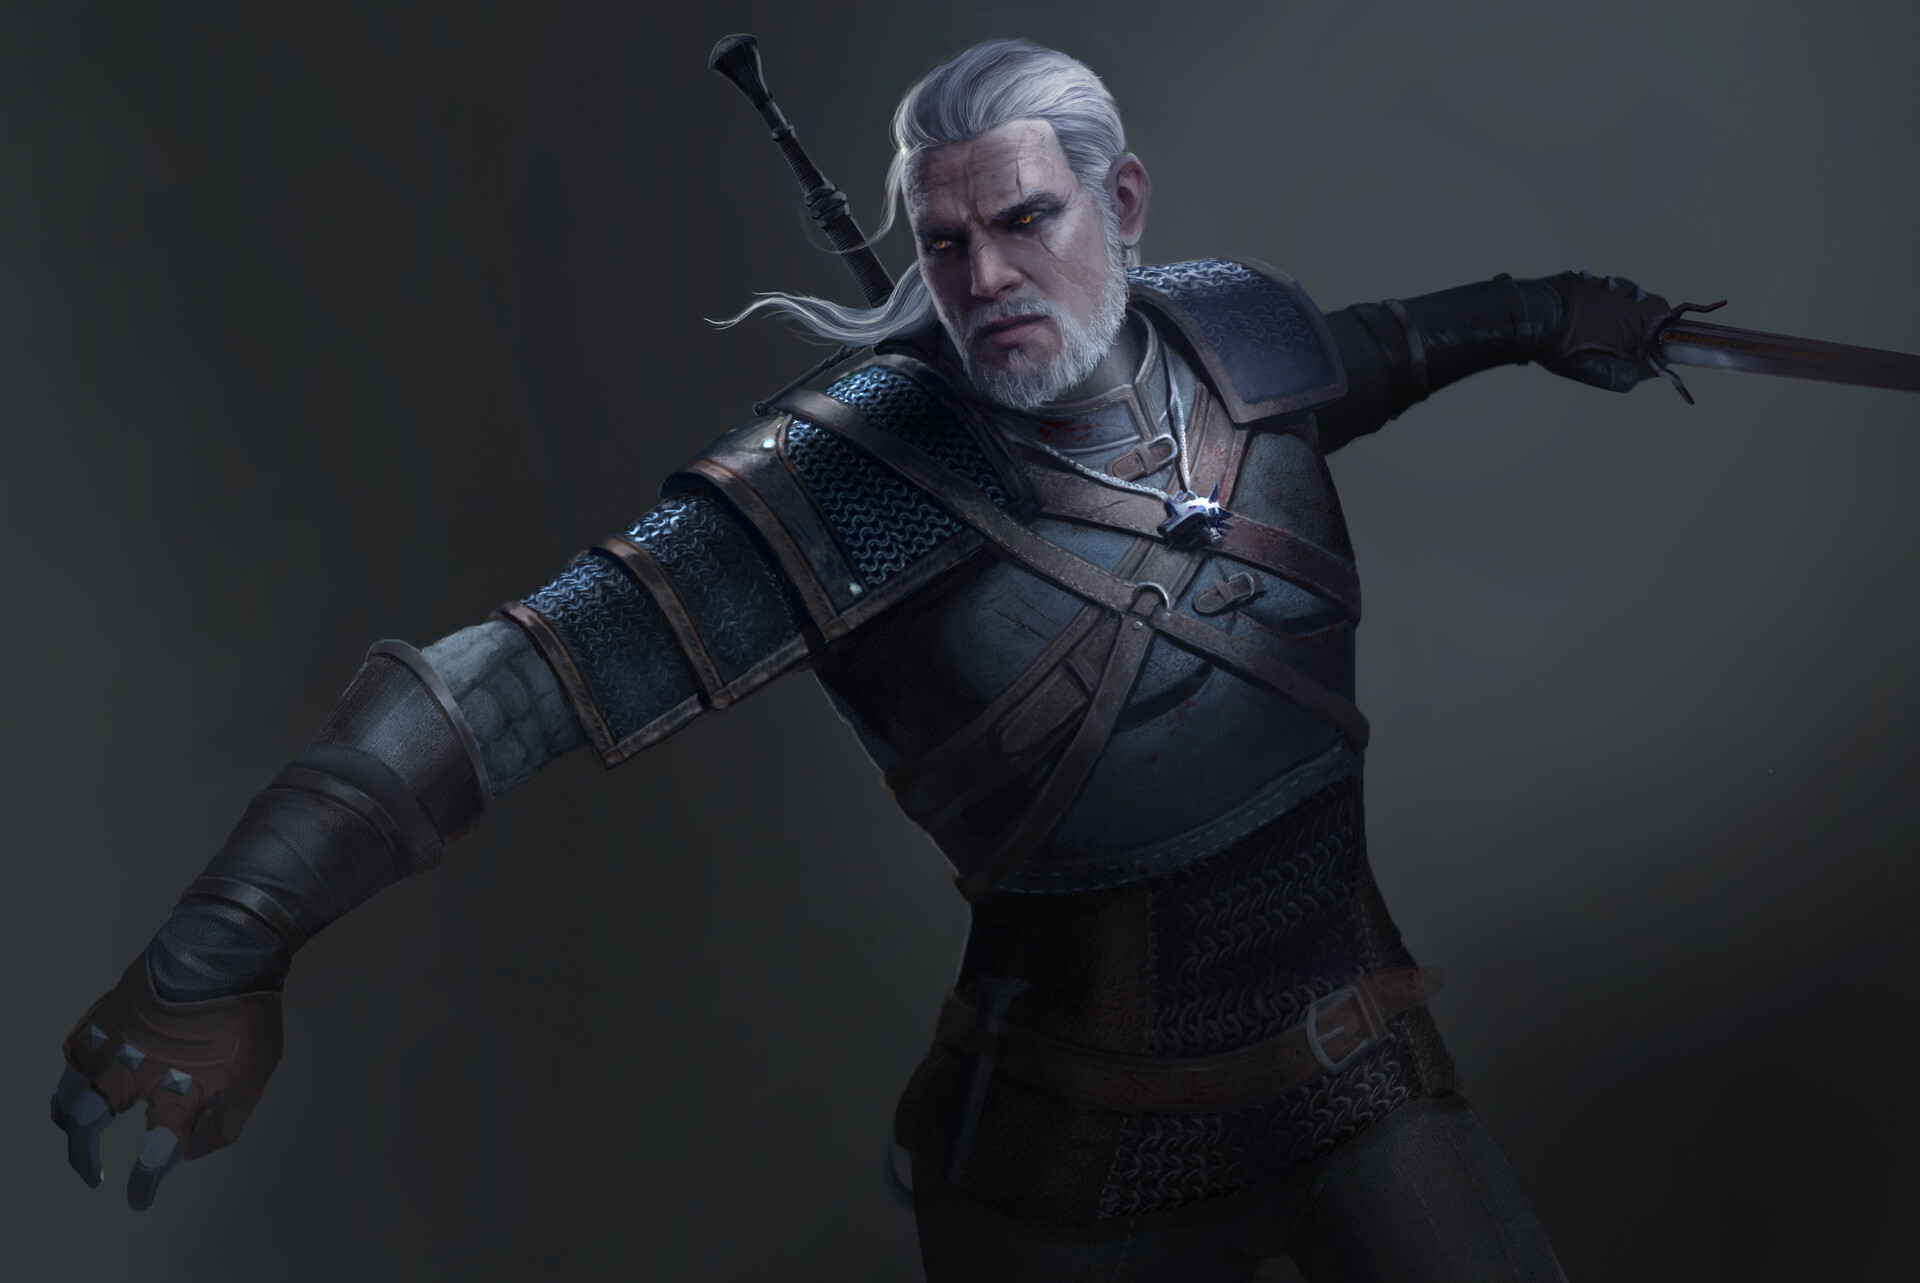 The Witcher 3: Wild Hunt HD Wallpaper by Shiyuan Luo